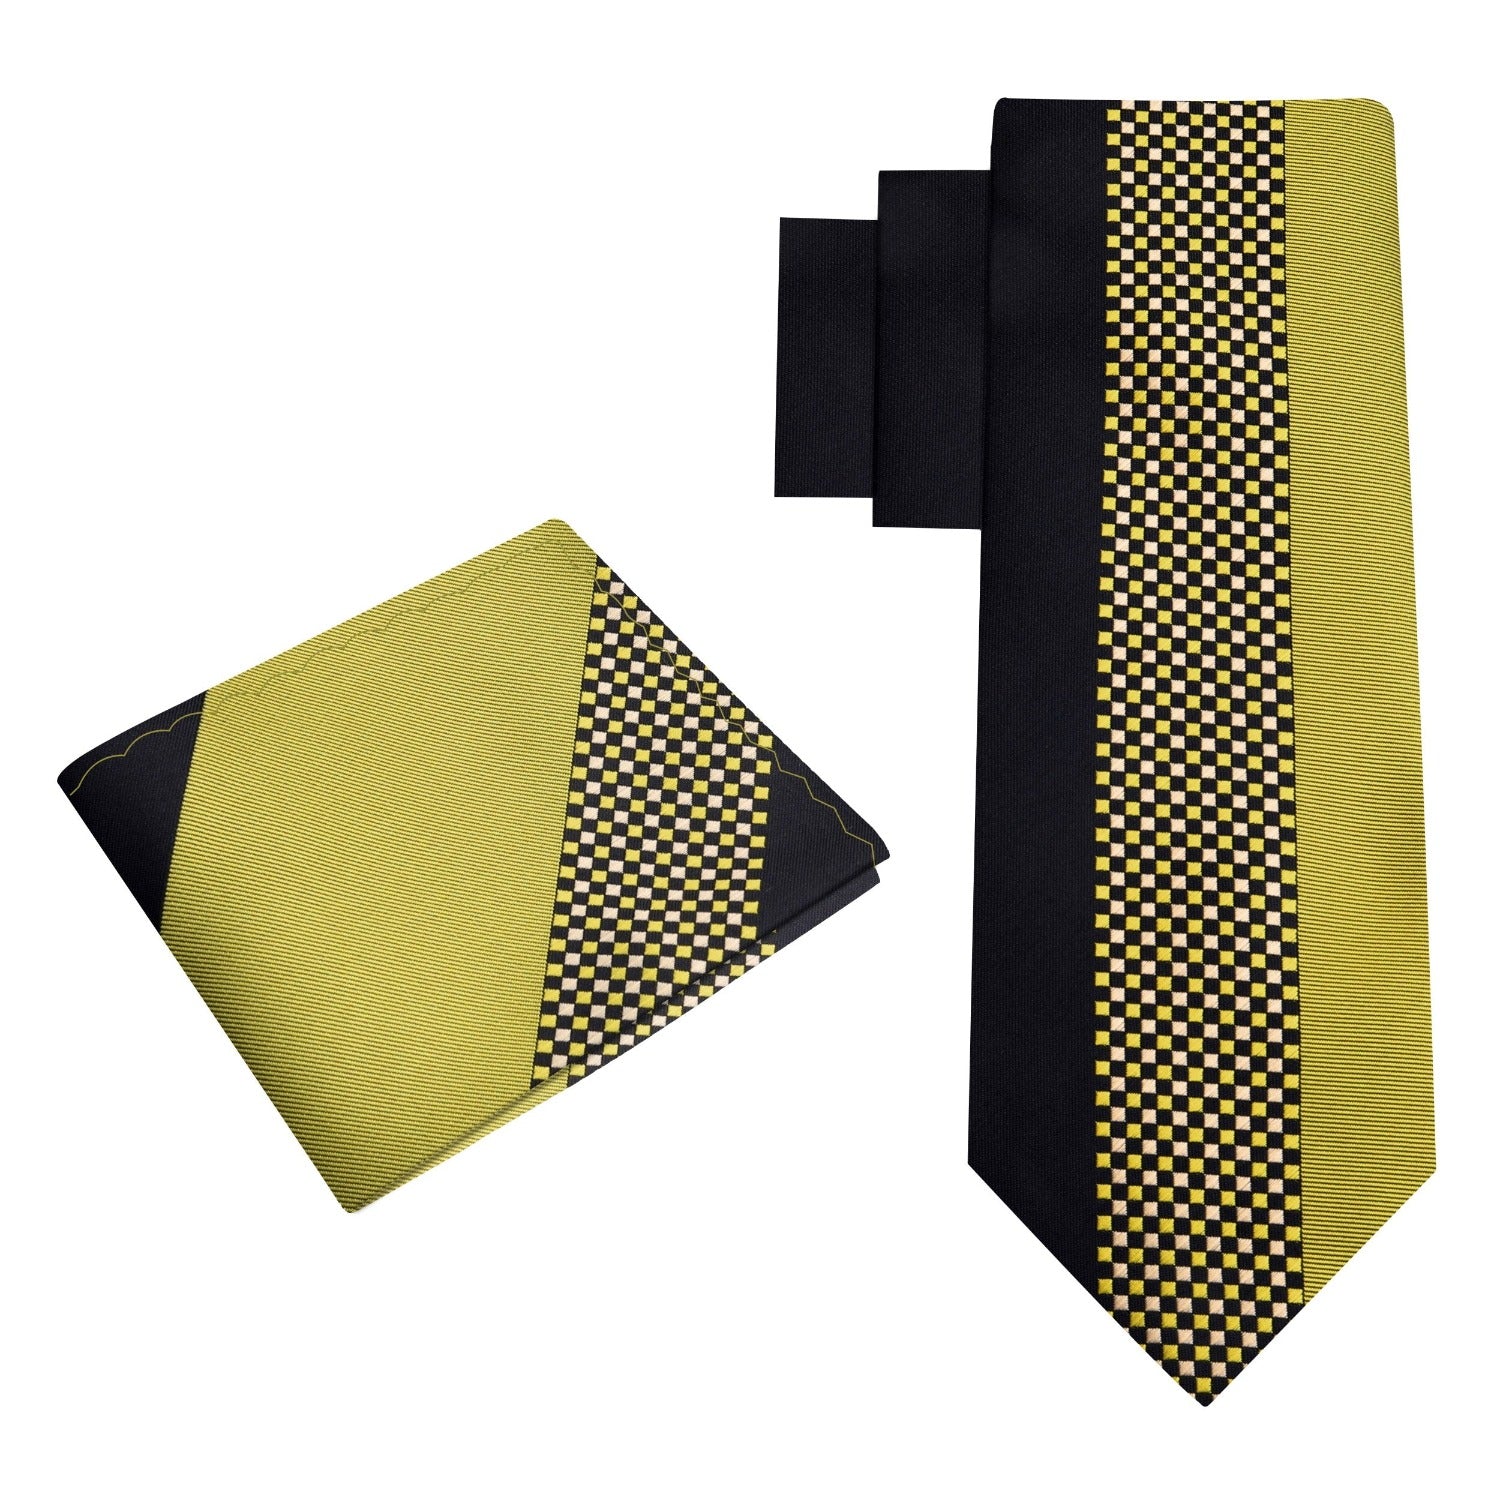 Alt View: Gold and Black Small Check Necktie and Matching Square